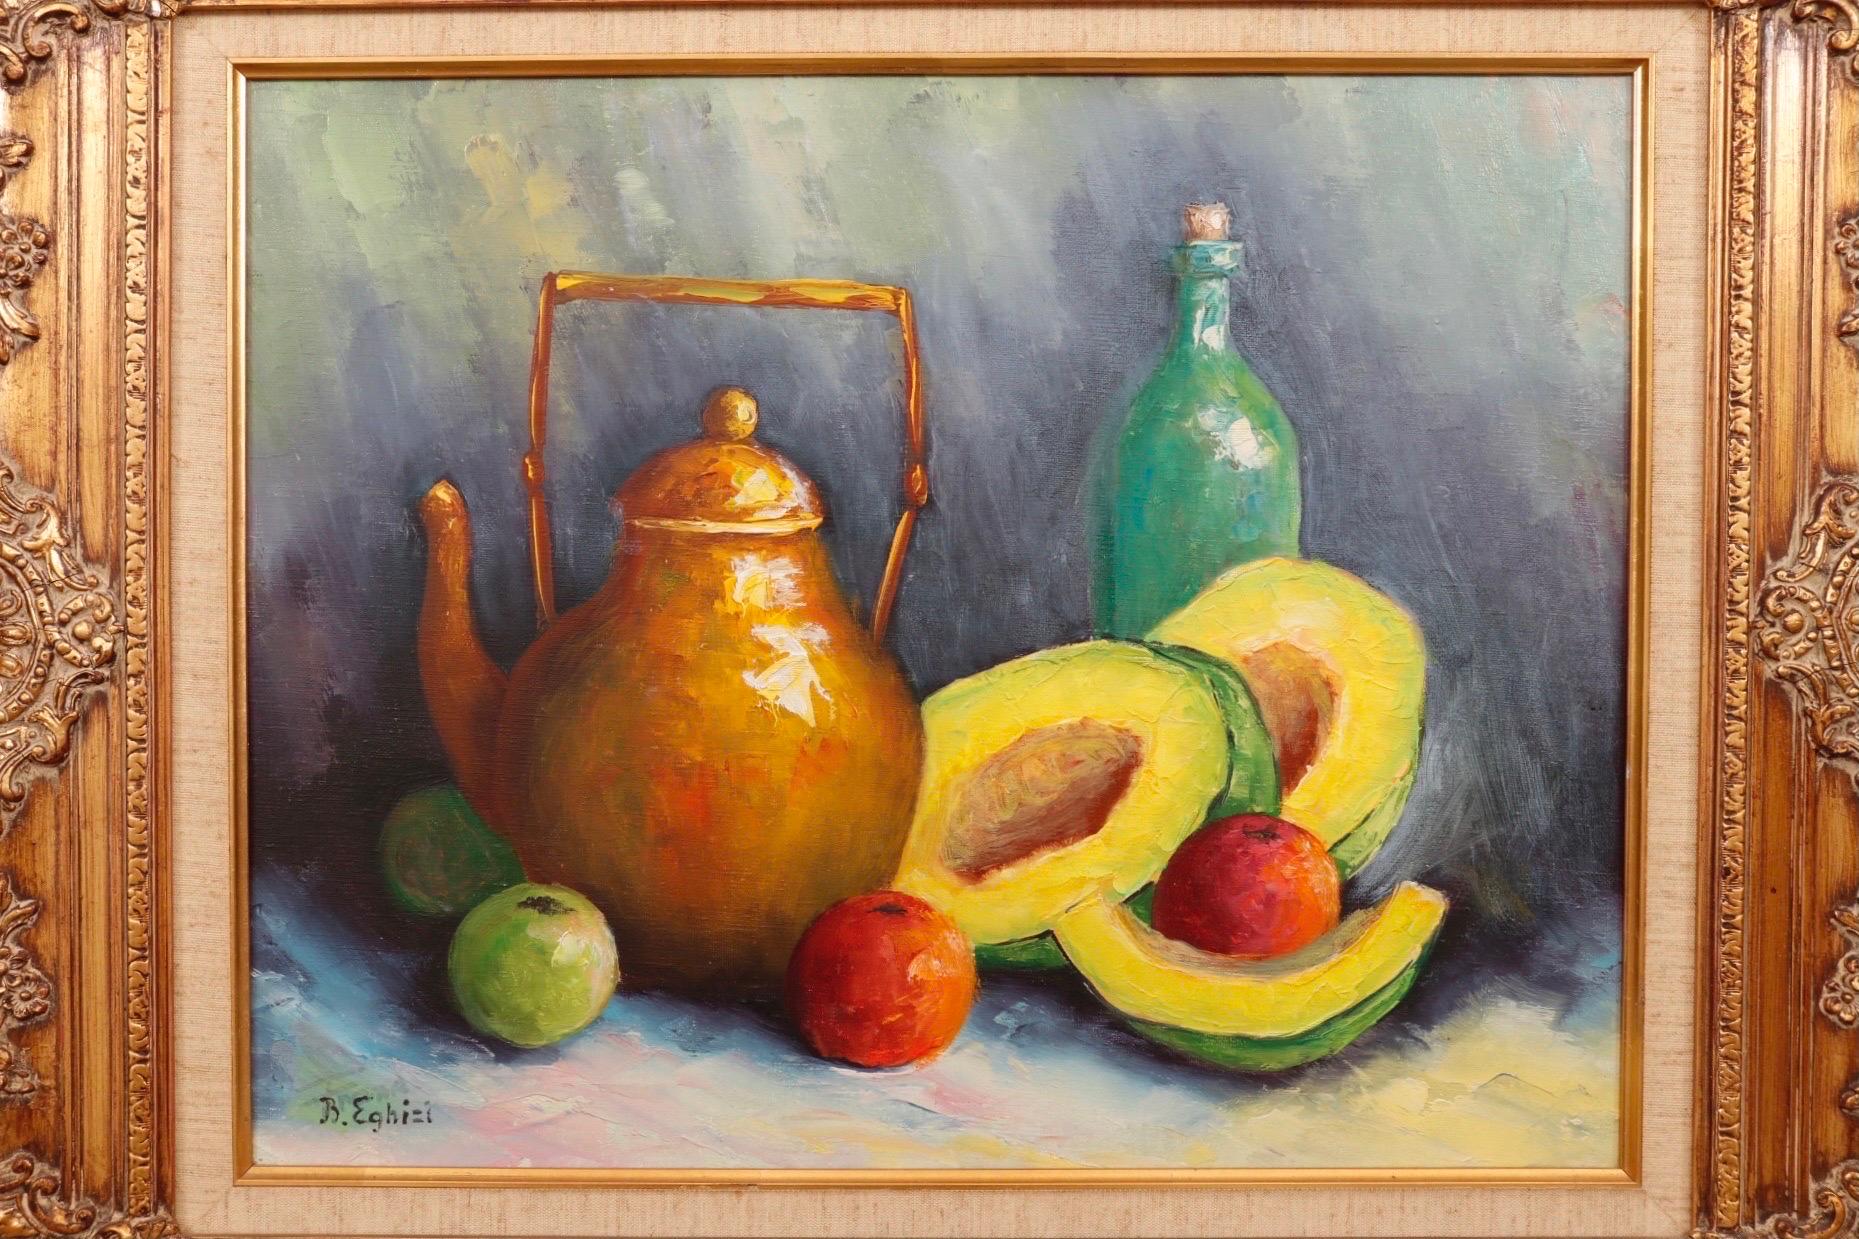 An oil on canvas still life depicting a teapot, wine bottle and fruit, signed by the artist in the bottom left corner. The ornately carved wooden frame is painted gold, made by G & A Van Den Bogaerde Ltd. of Belgium, the makers label can be seen on